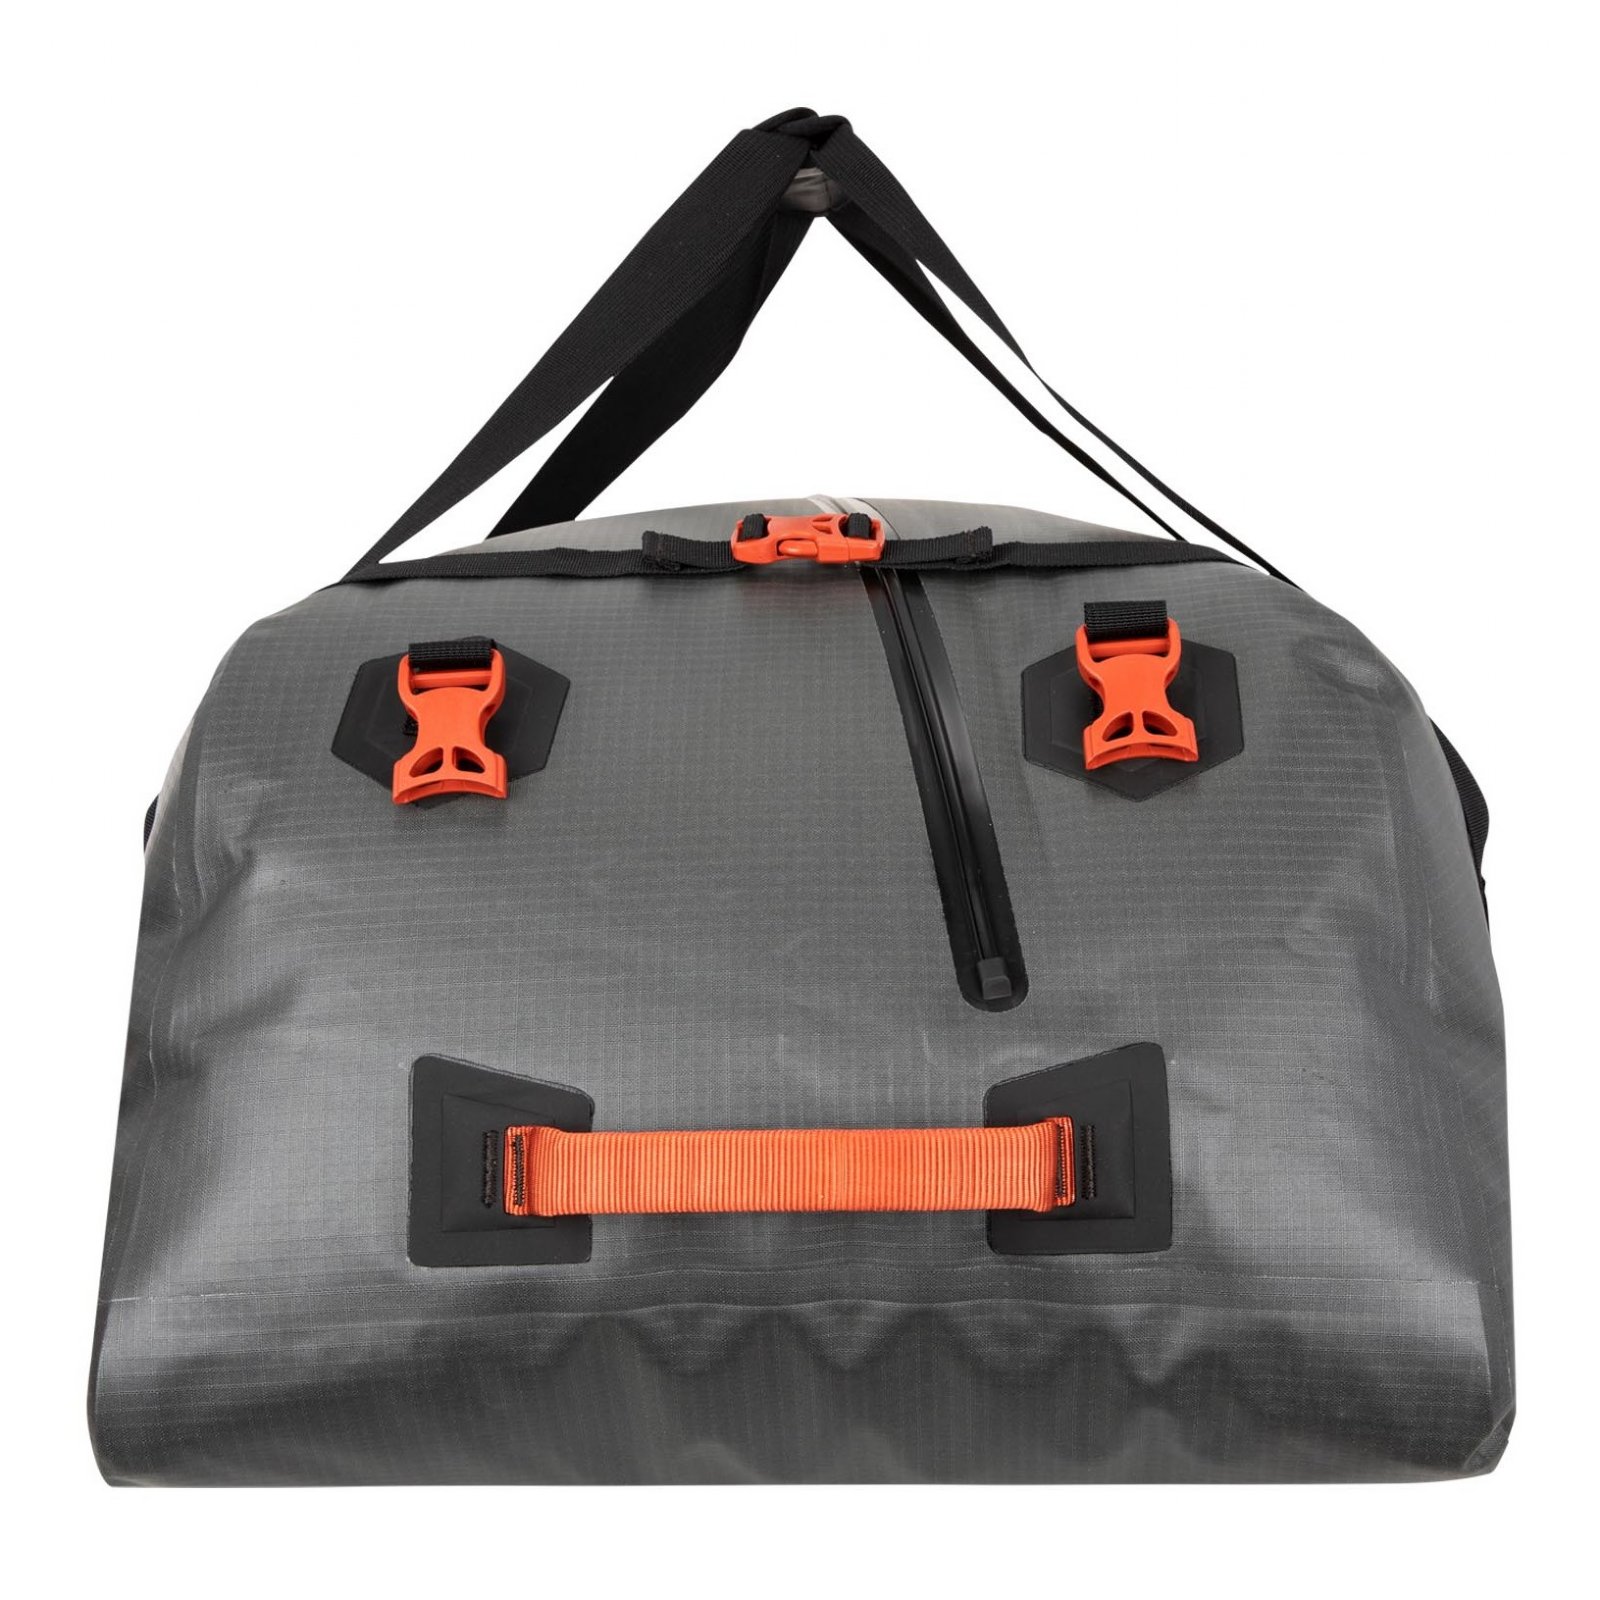 Simms Luggage & Travel Bags